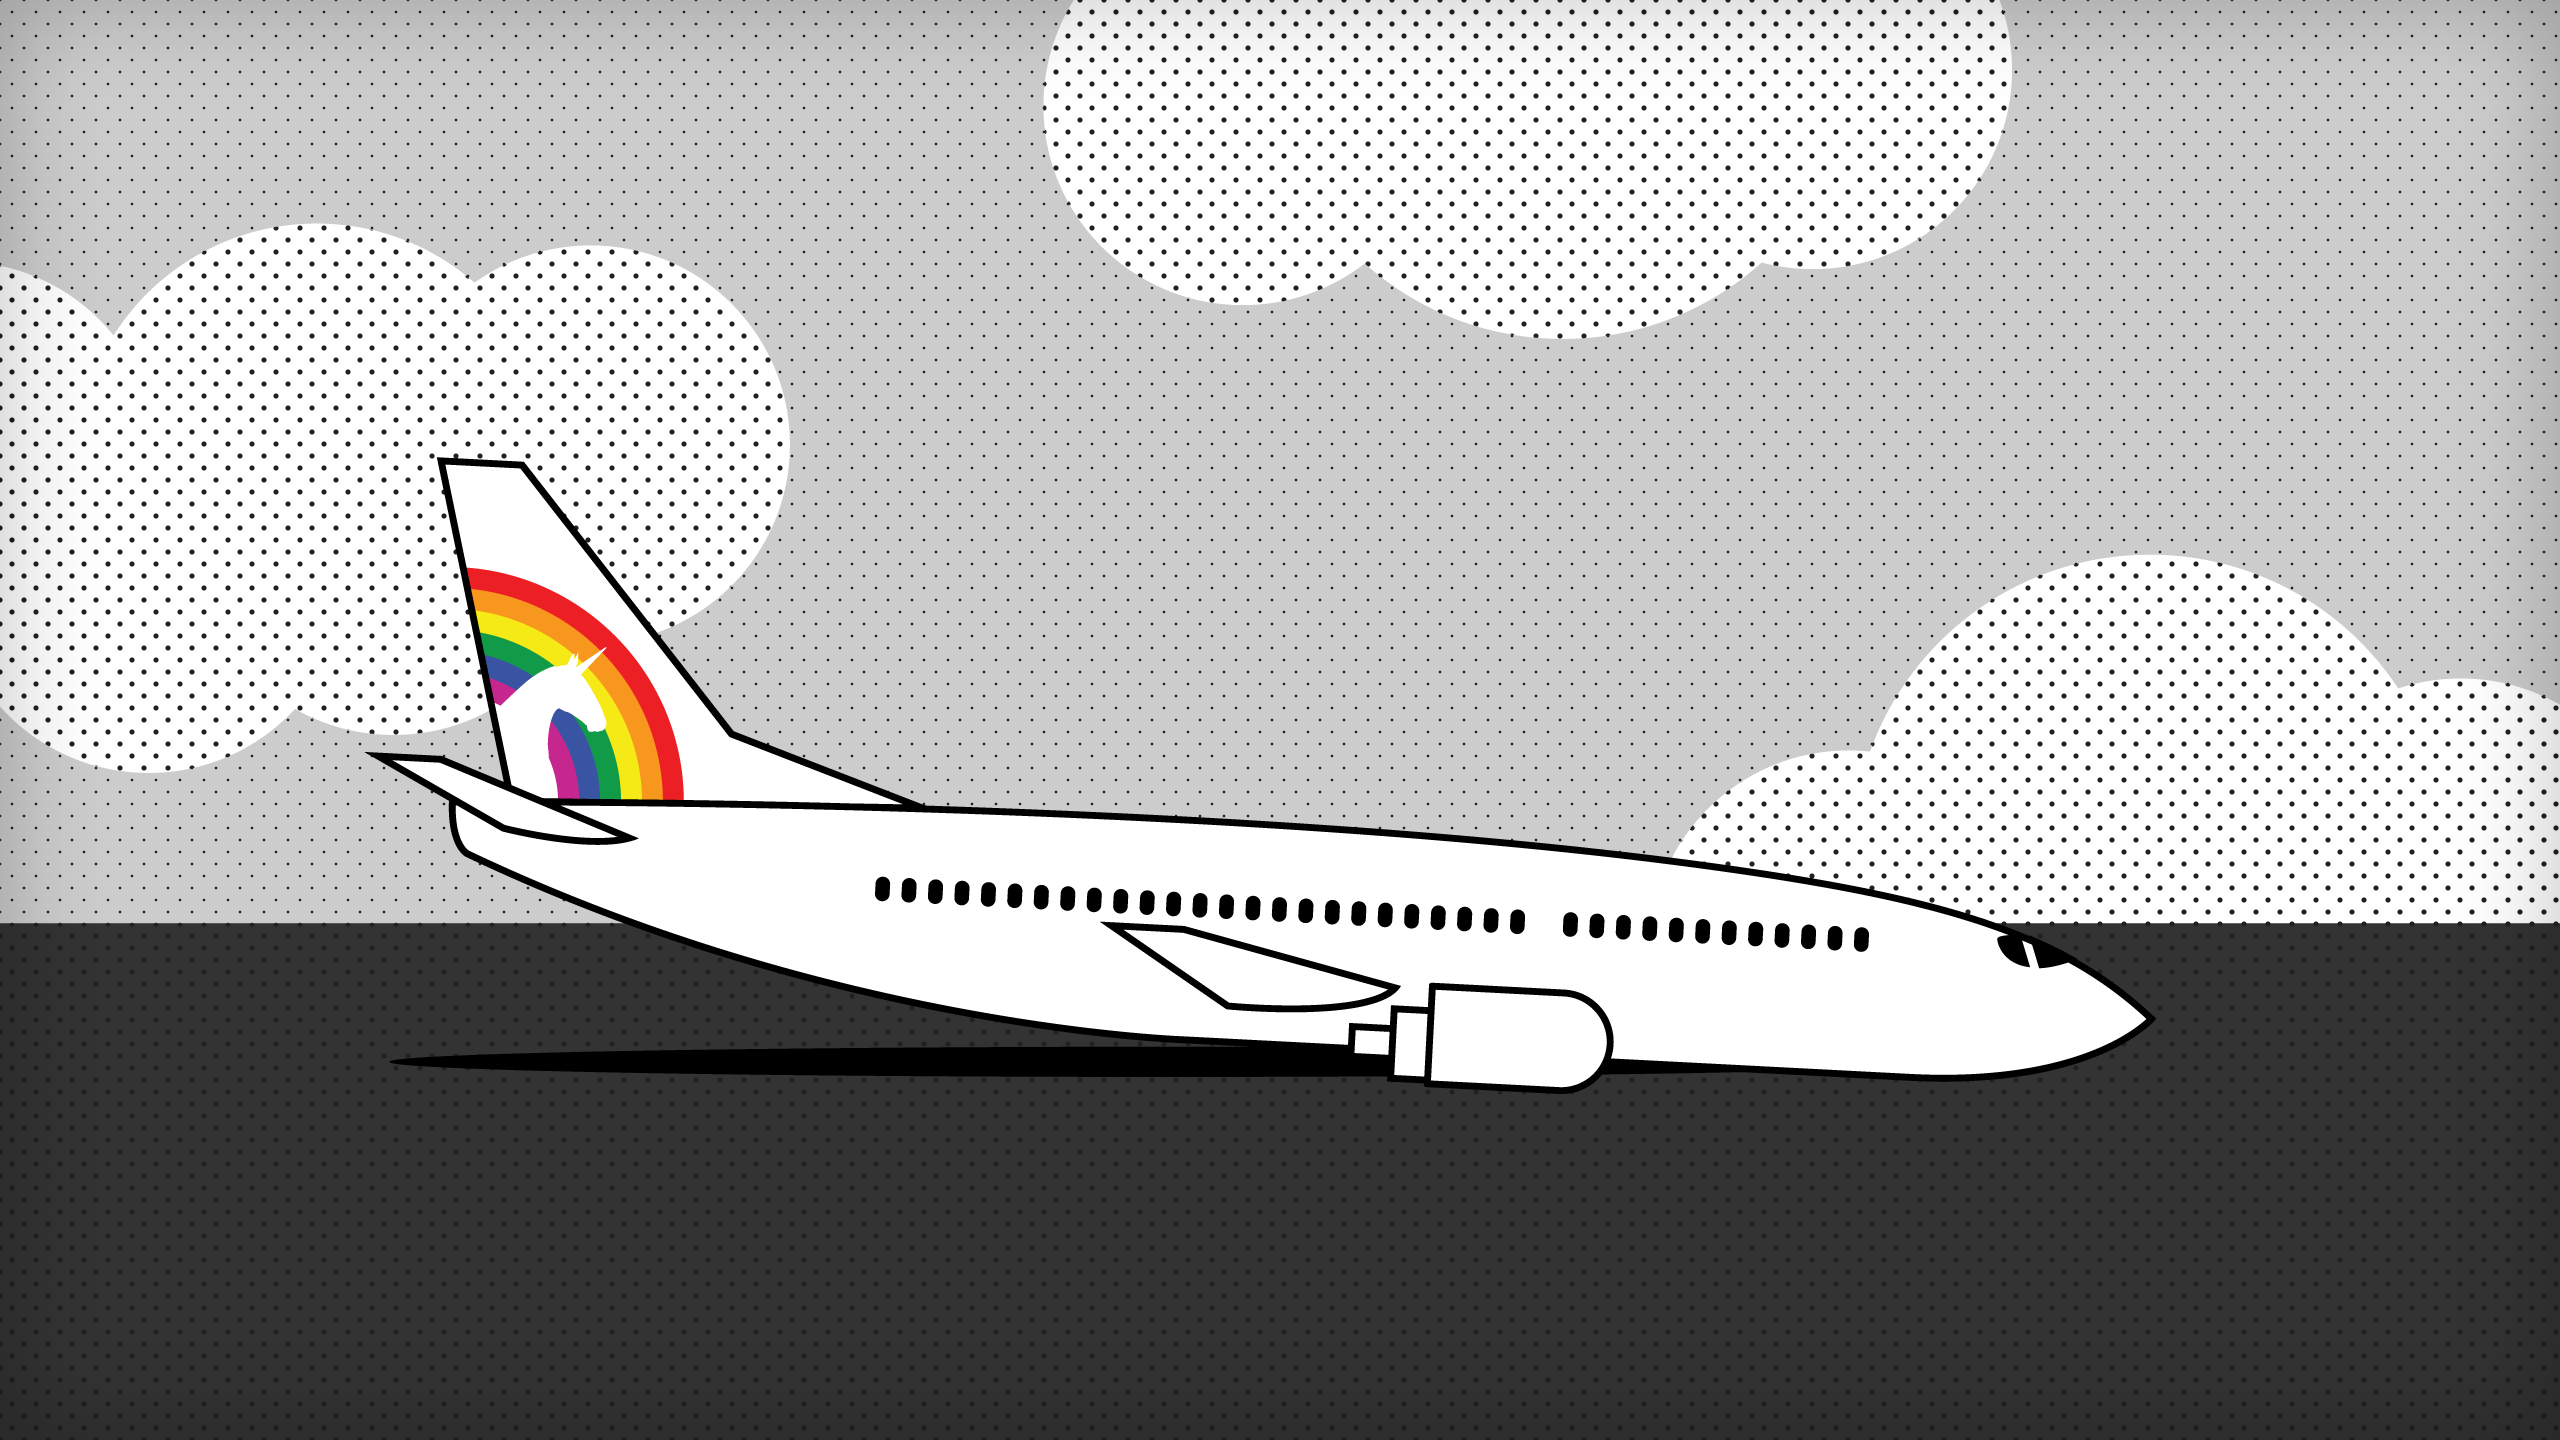 An illustration of a descending jet airplane with a unicorn logo on its tail